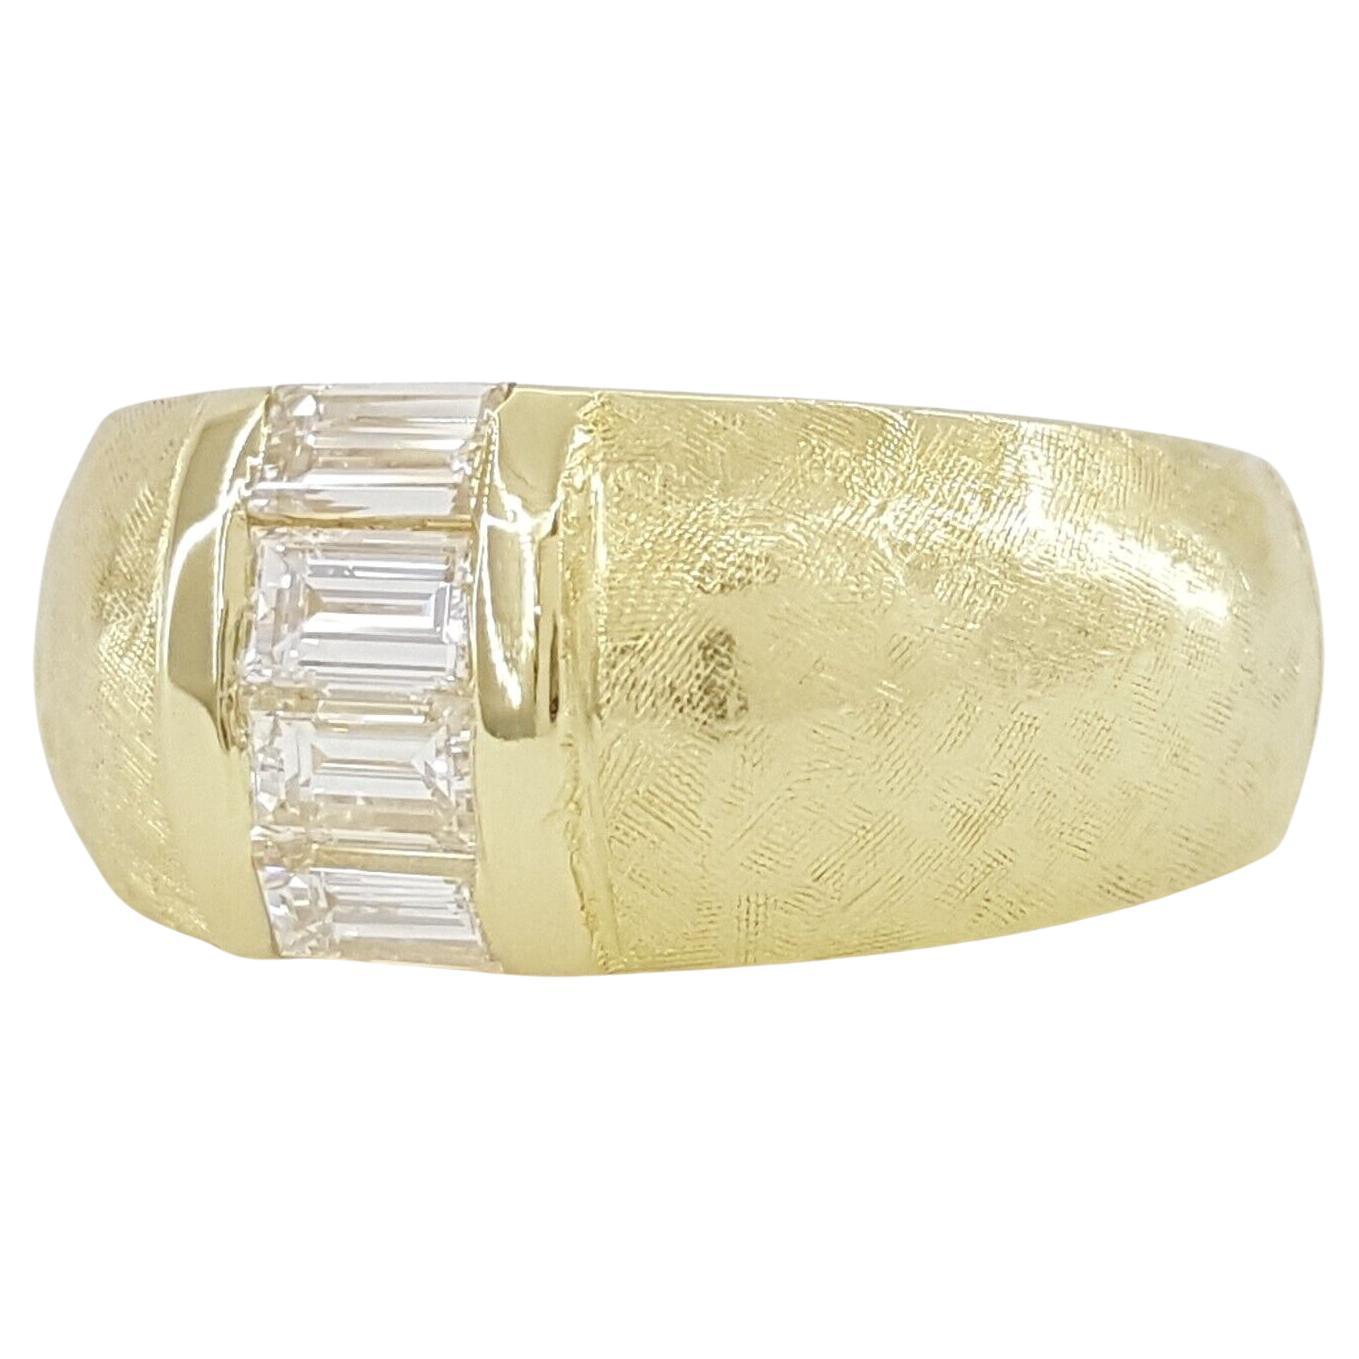 Stunning 0.6 ct Total Weight Baguette Brilliant Cut Diamond Channel Set Wedding Band/Anniversary Ring in 18K Yellow Gold!

Elegance meets sophistication in this exquisite ring, meticulously crafted to symbolize everlasting love and commitment.

Key